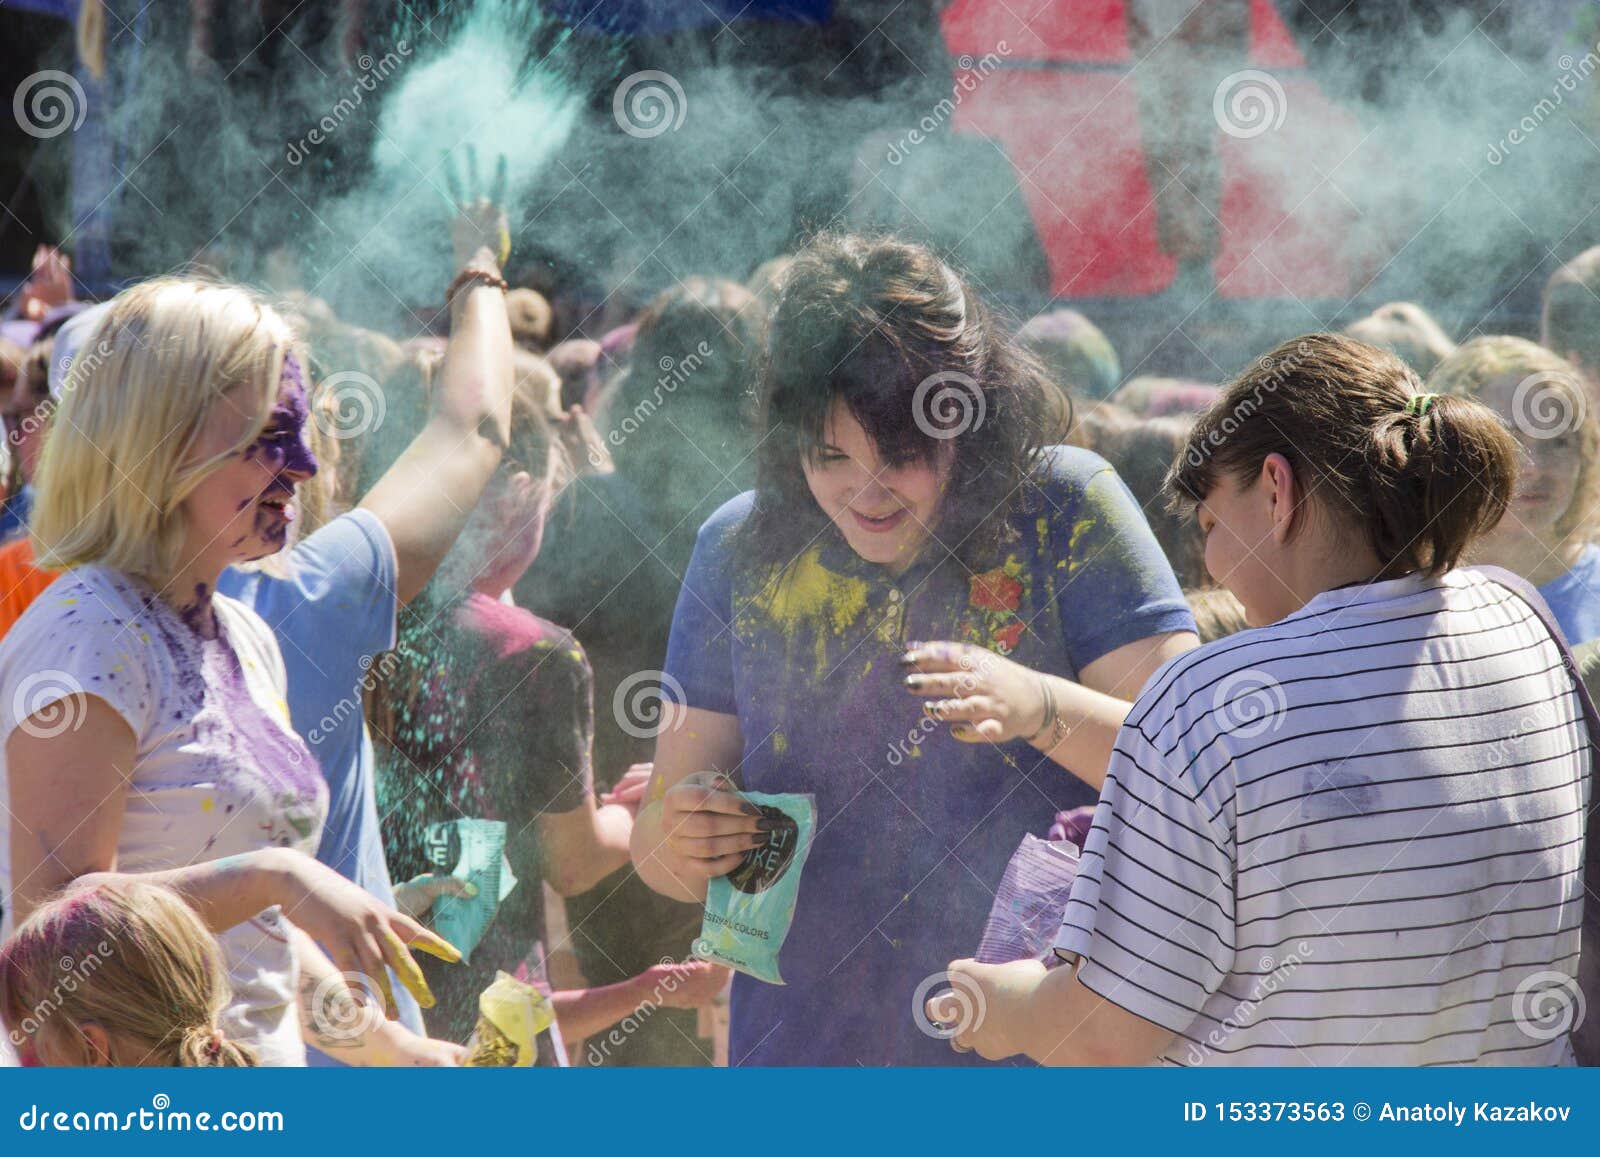 Russia, Krasnoyarsk, June 2019: Young People Play With Colors. The